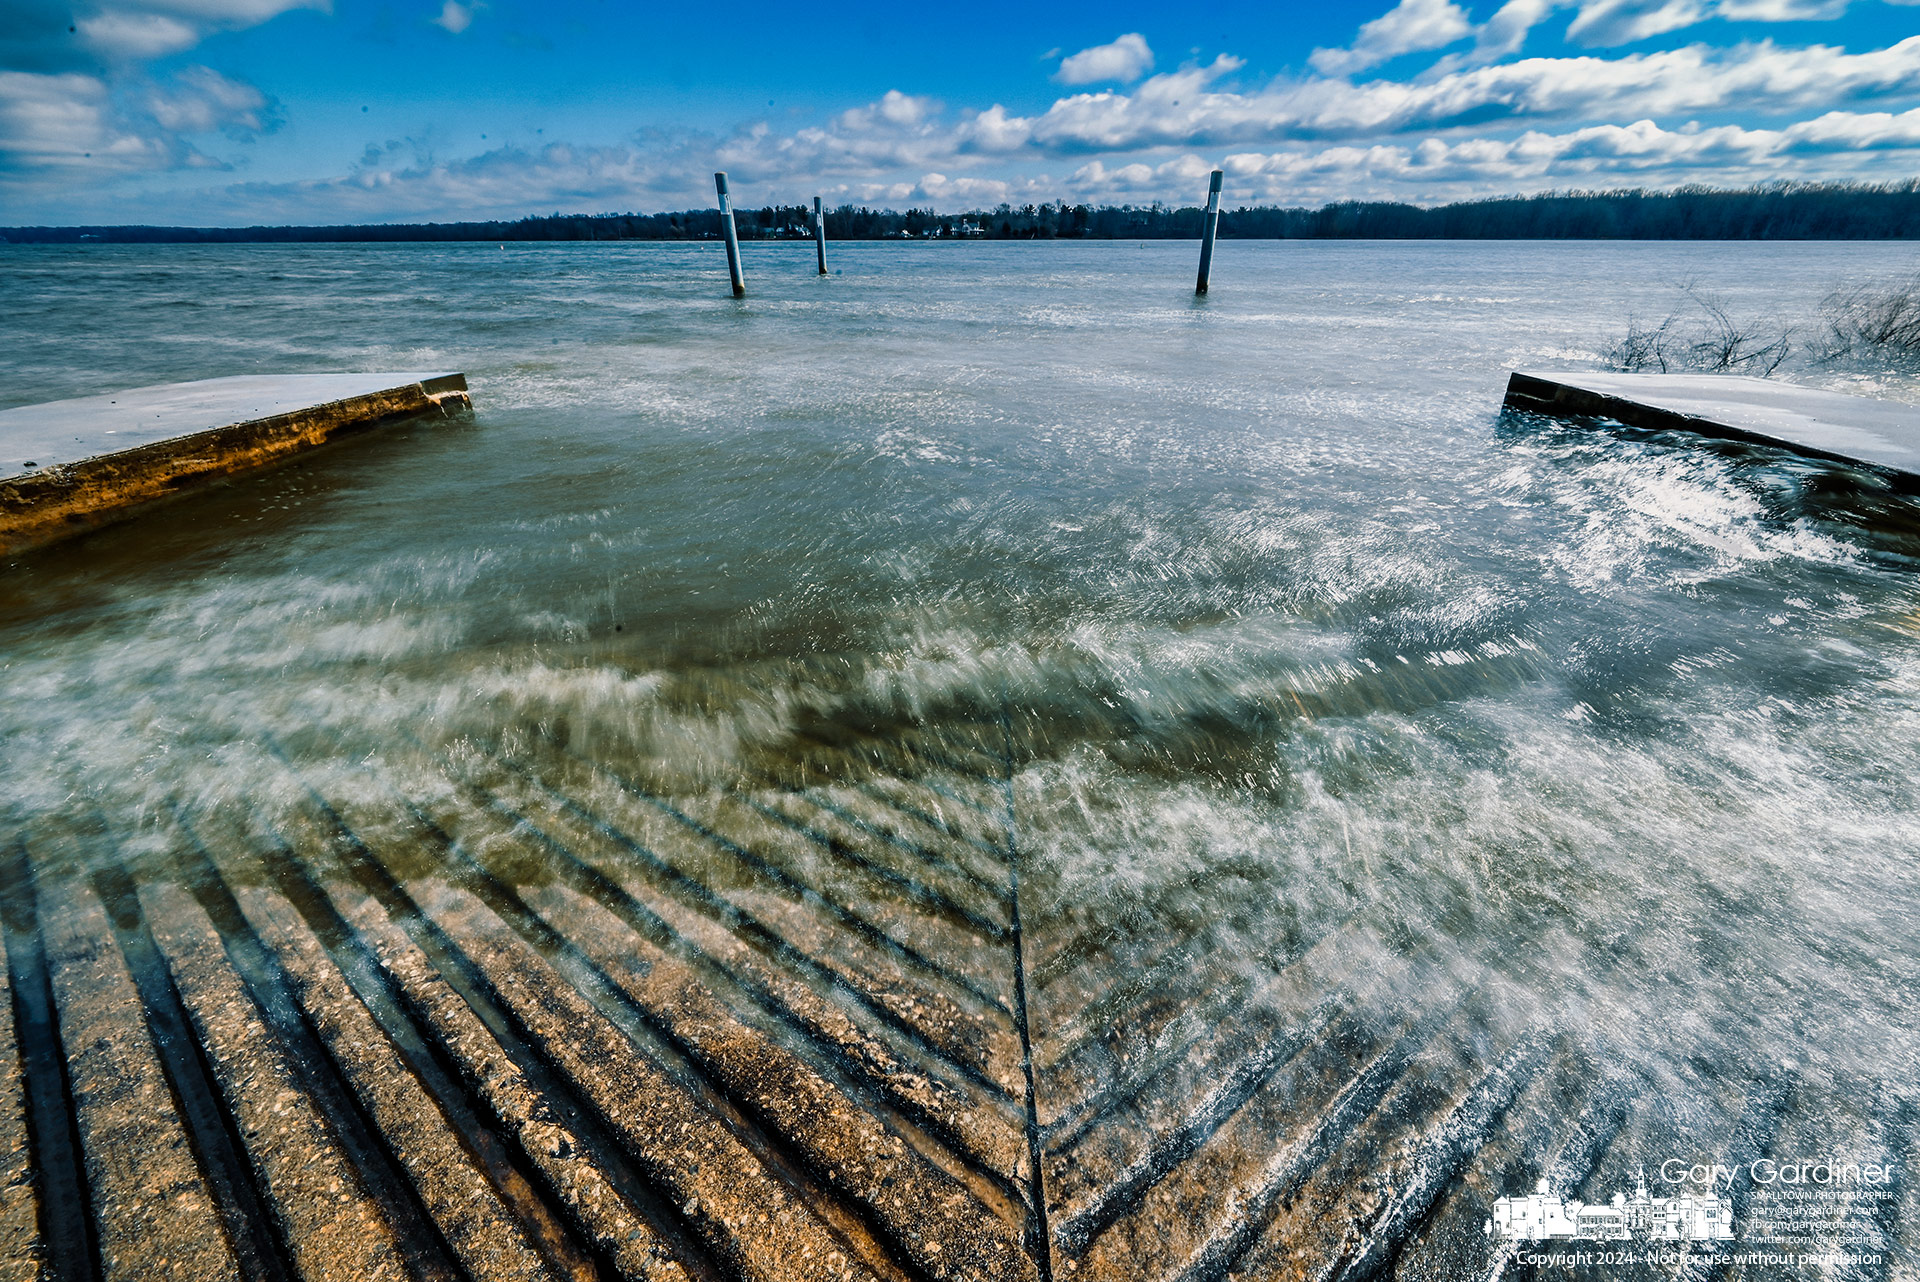 Strong northerly winds create whitecaps across Hoover Reservoir and push the high waters onto the boat ramp at Red Bank Park on Saturday afternoon. My Final Photo for March 23, 2024.